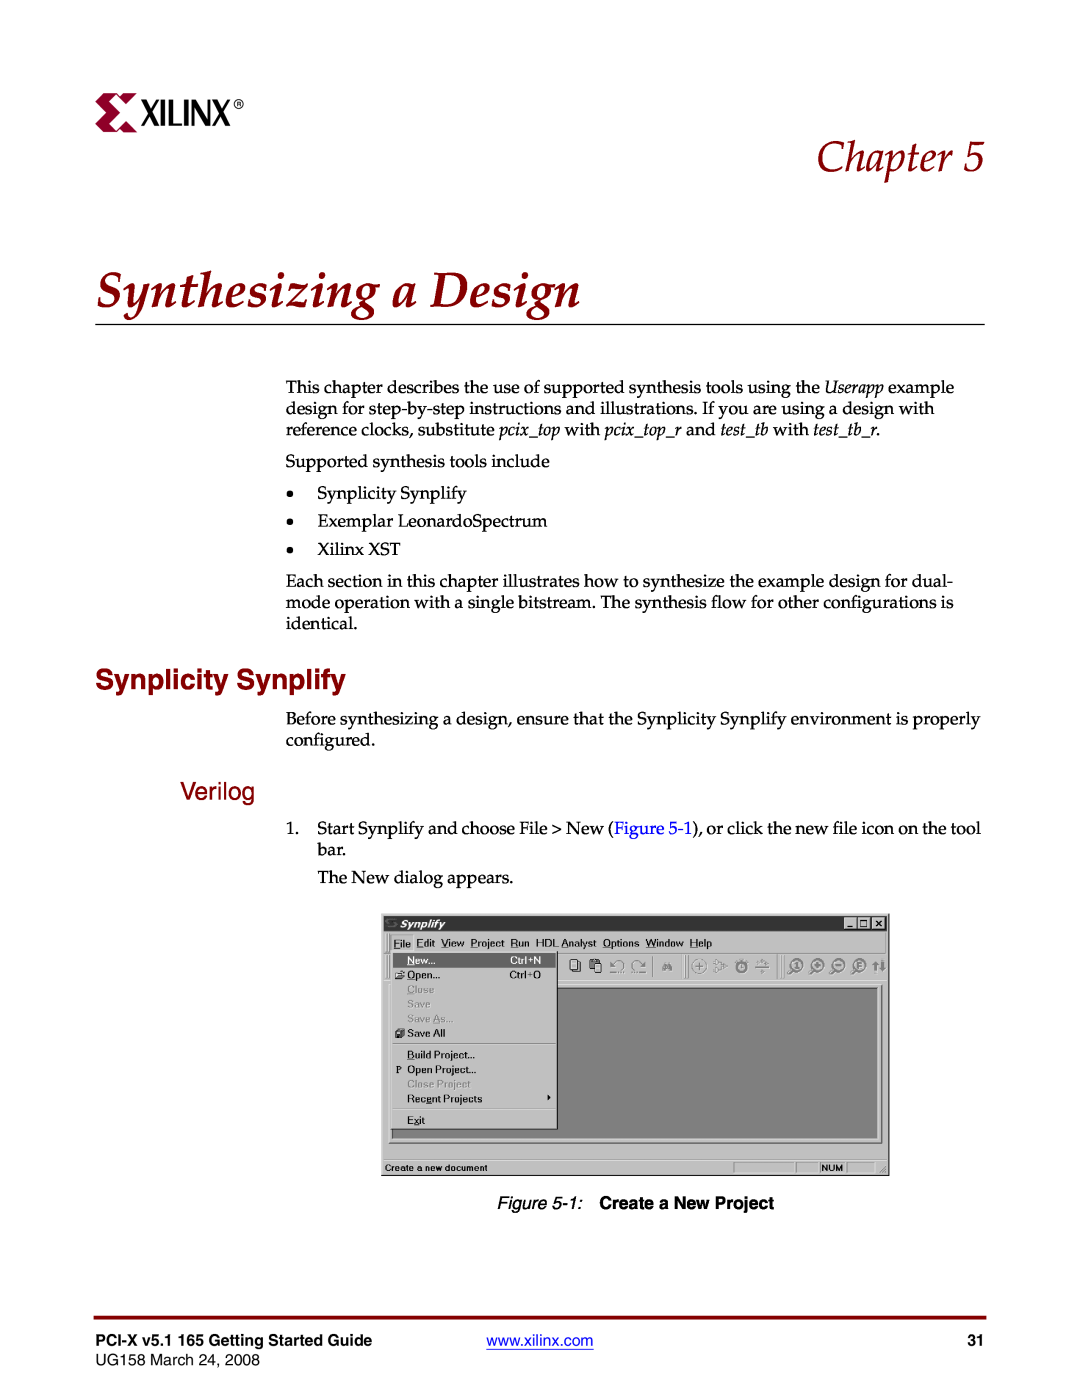 Xilinx PCI-X v5.1 manual Synthesizing a Design, Synplicity Synplify, 1 Create a New Project, Chapter, Verilog 